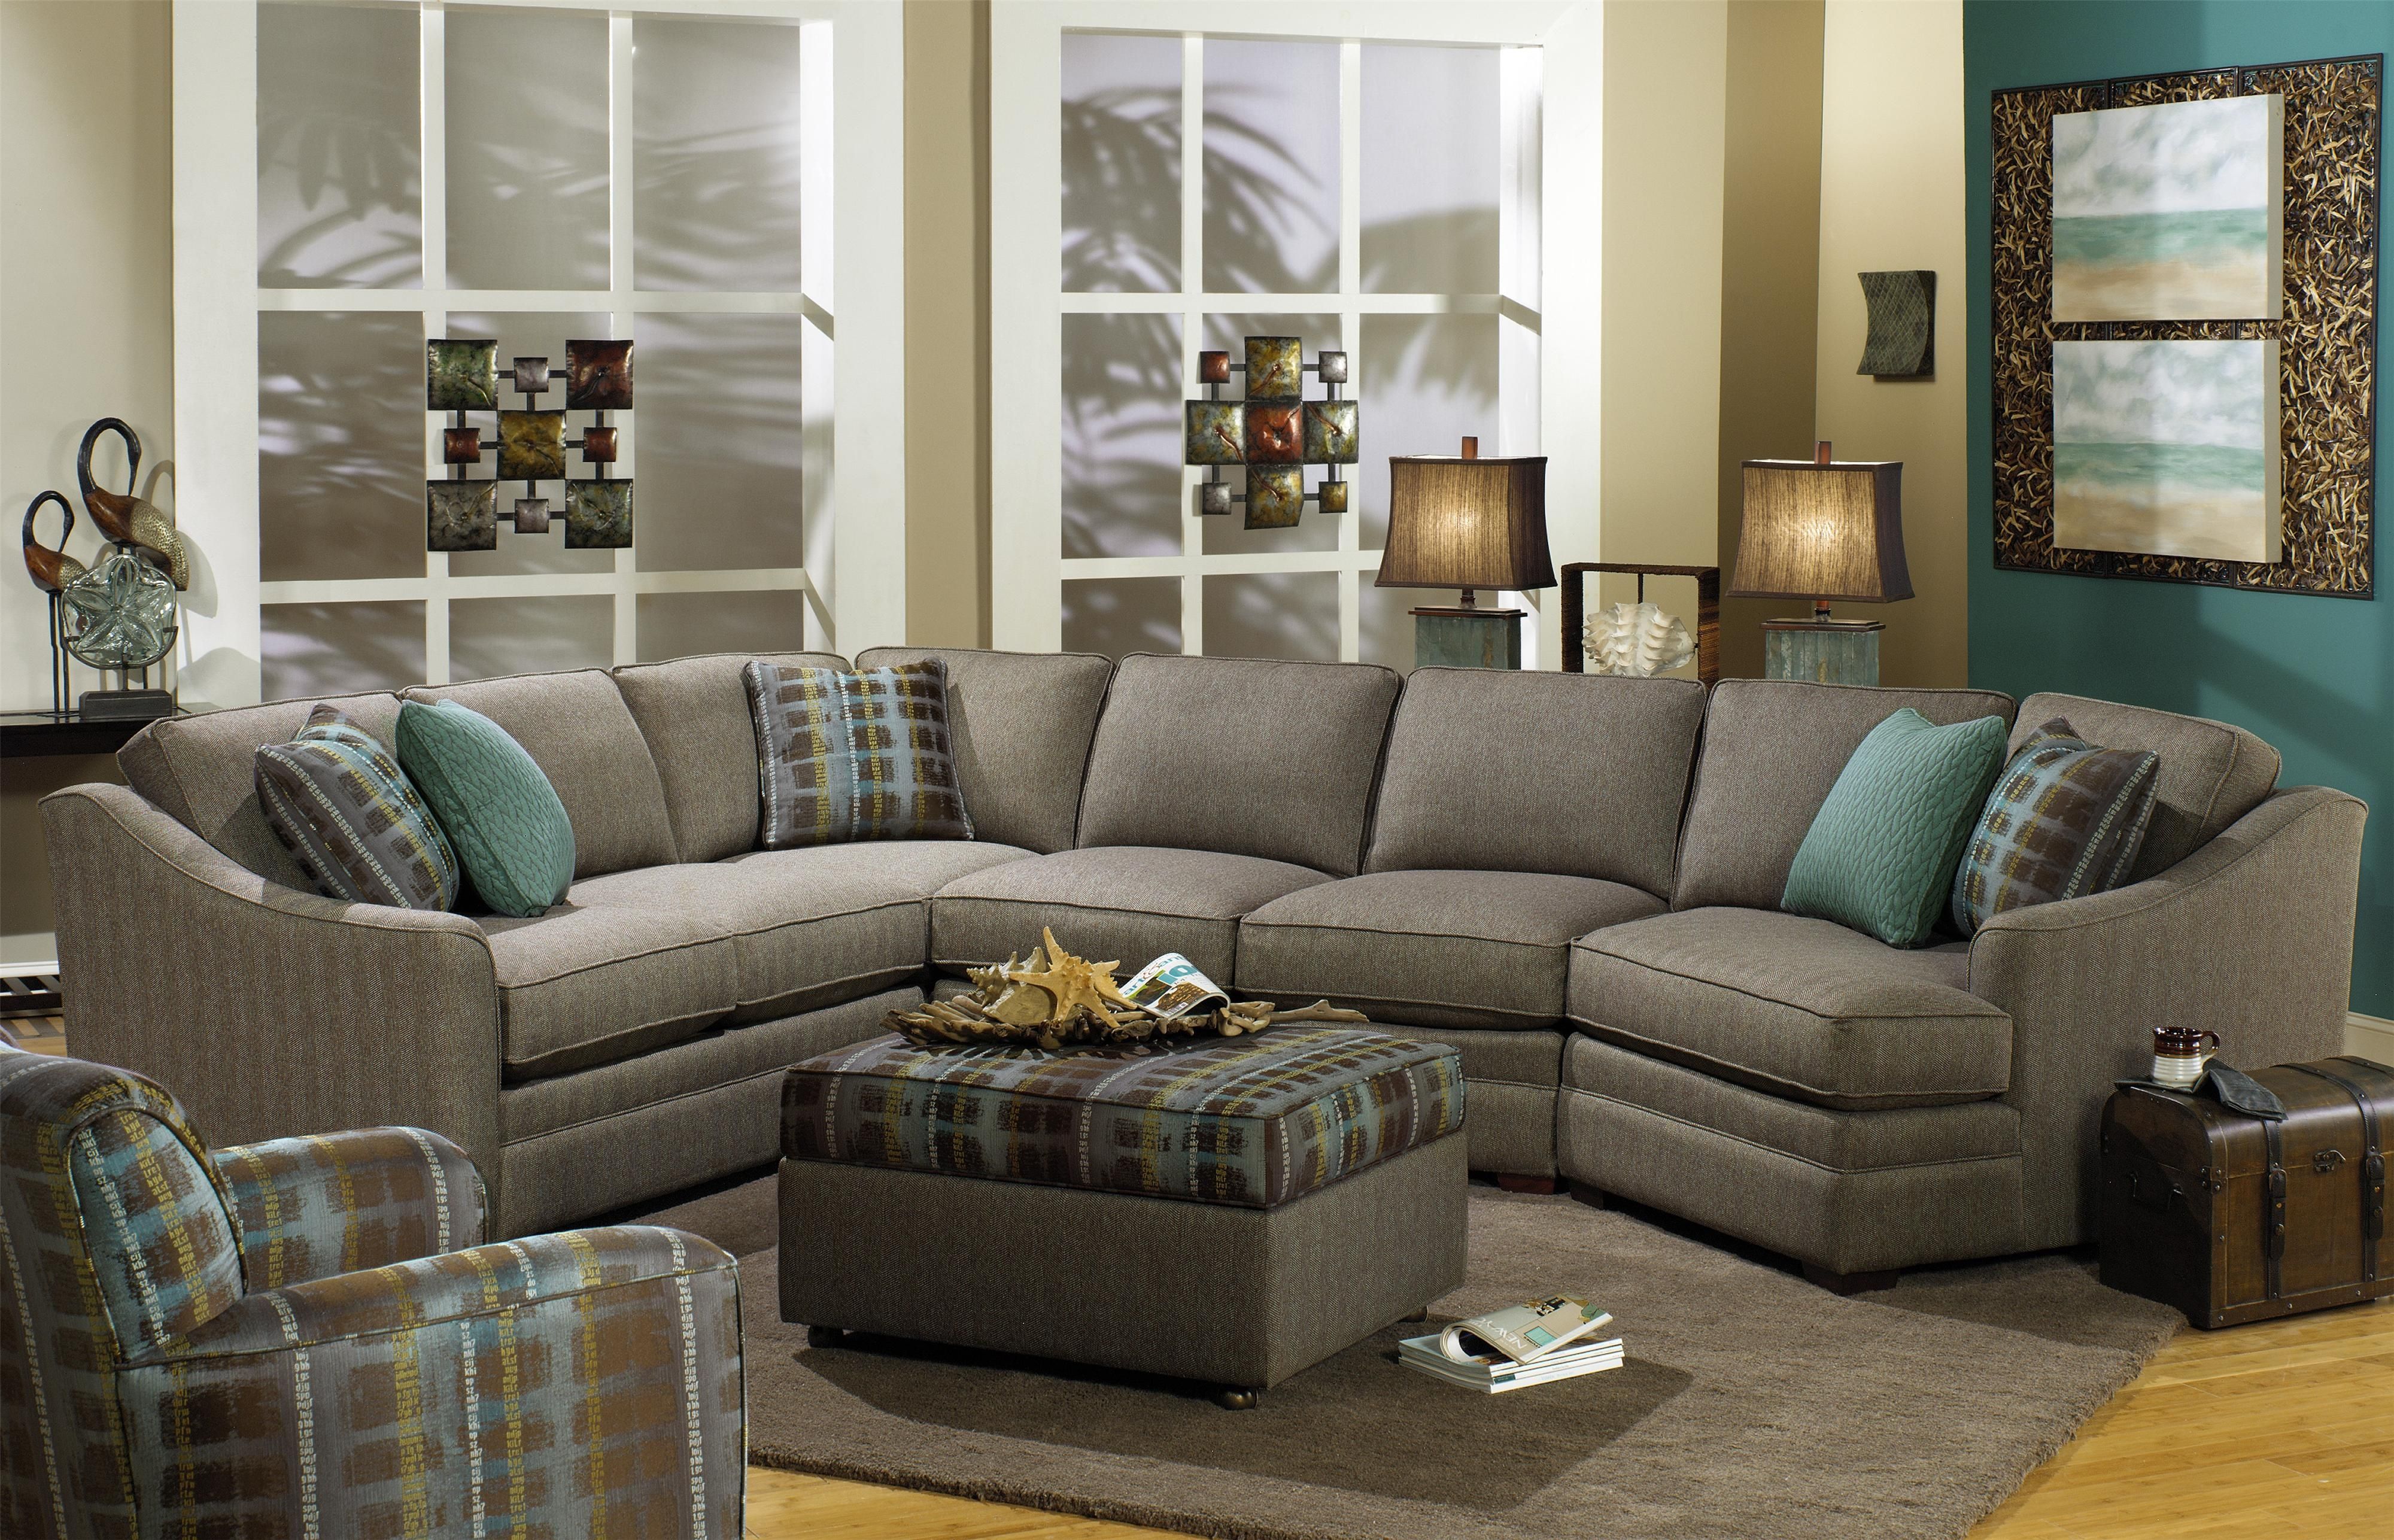 Craftmaster F9 Custom Collection Customizable 3 Piece Sectional For Craftsman Sectional Sofa (View 3 of 15)